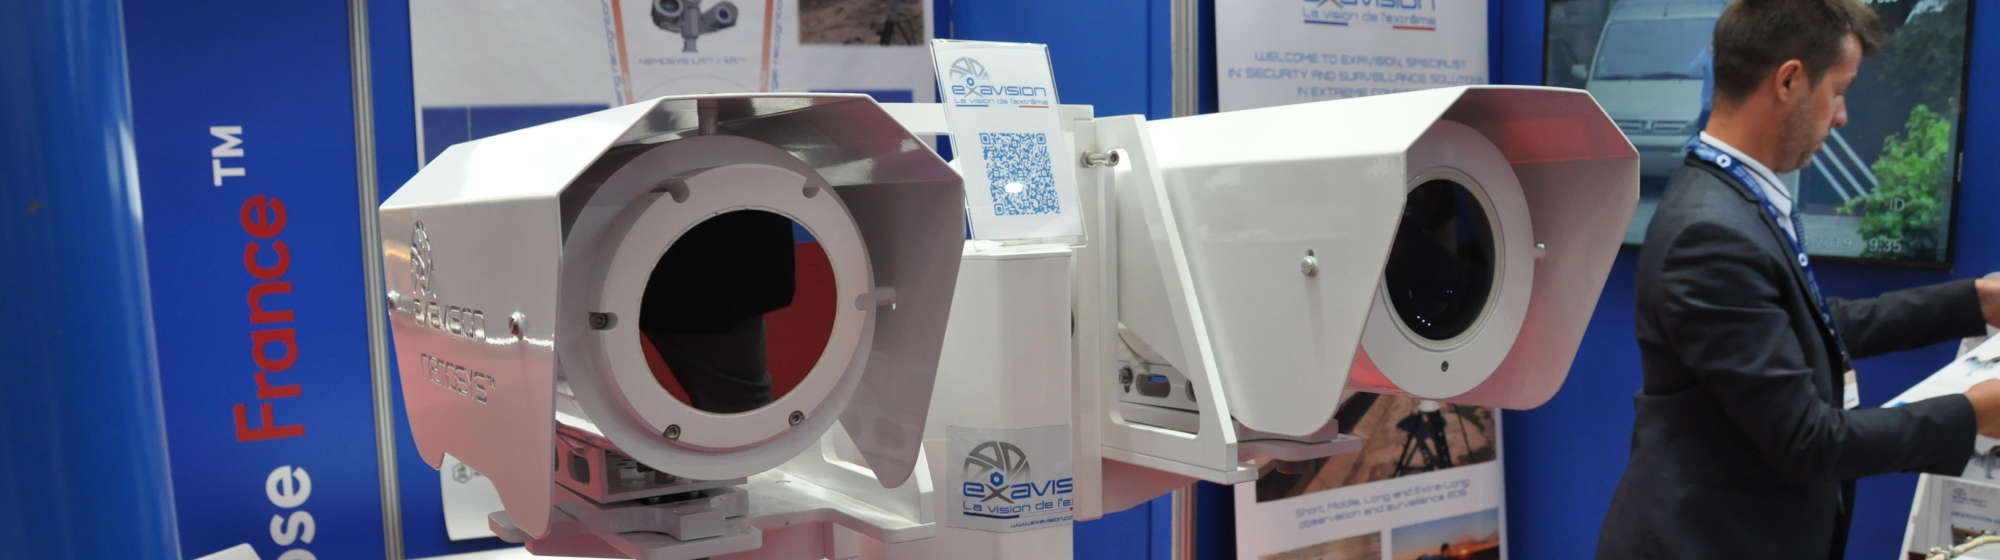 innovation displayed on an exhibitor stand at Milipol Qatar